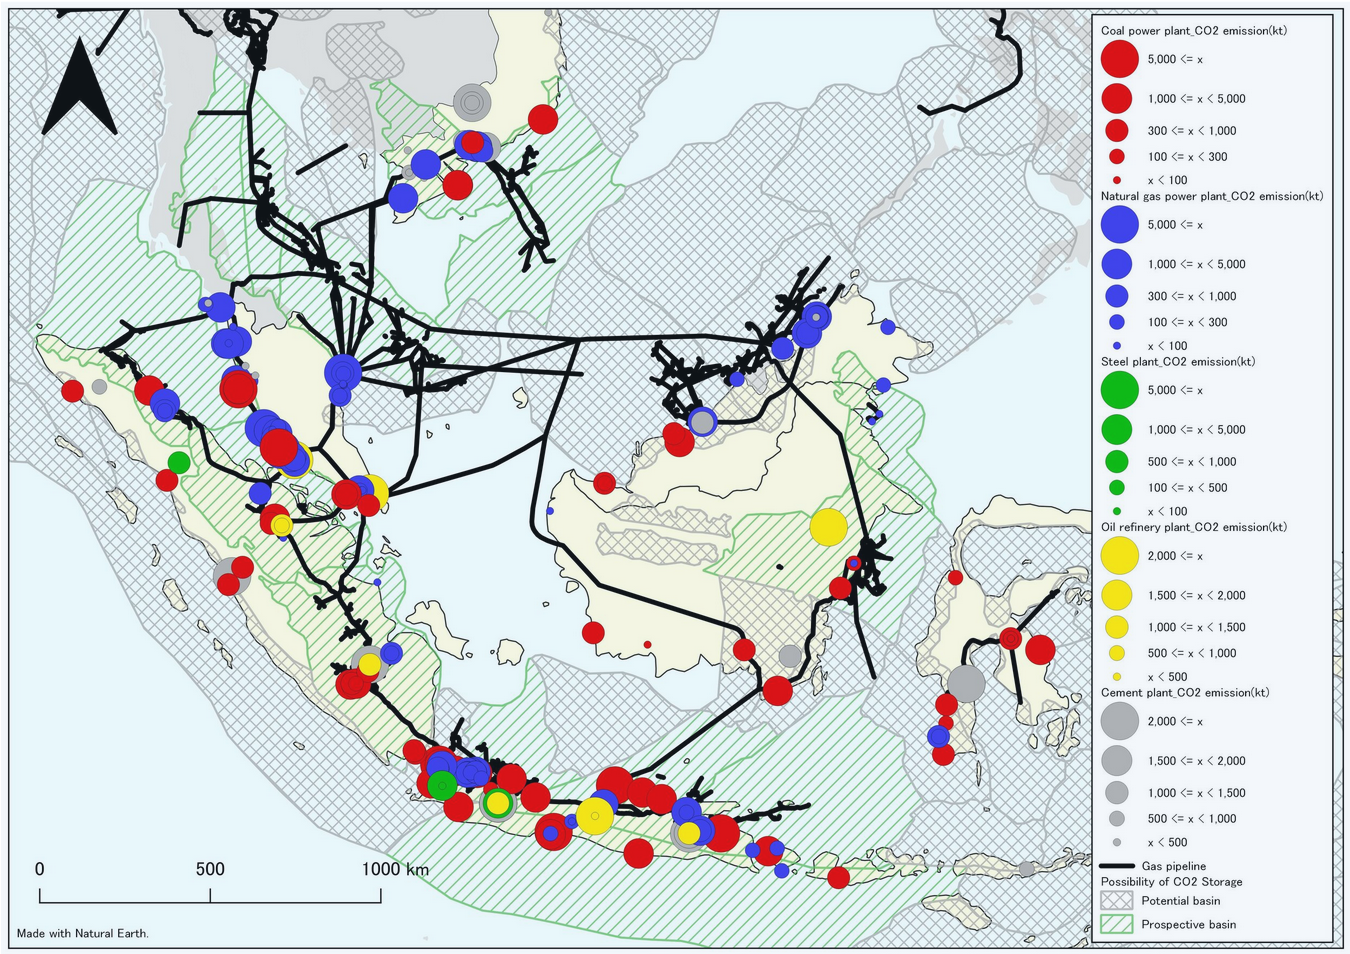 Potential Map For CCUS Projects in ASEAN, Source: Asia CCUS Network